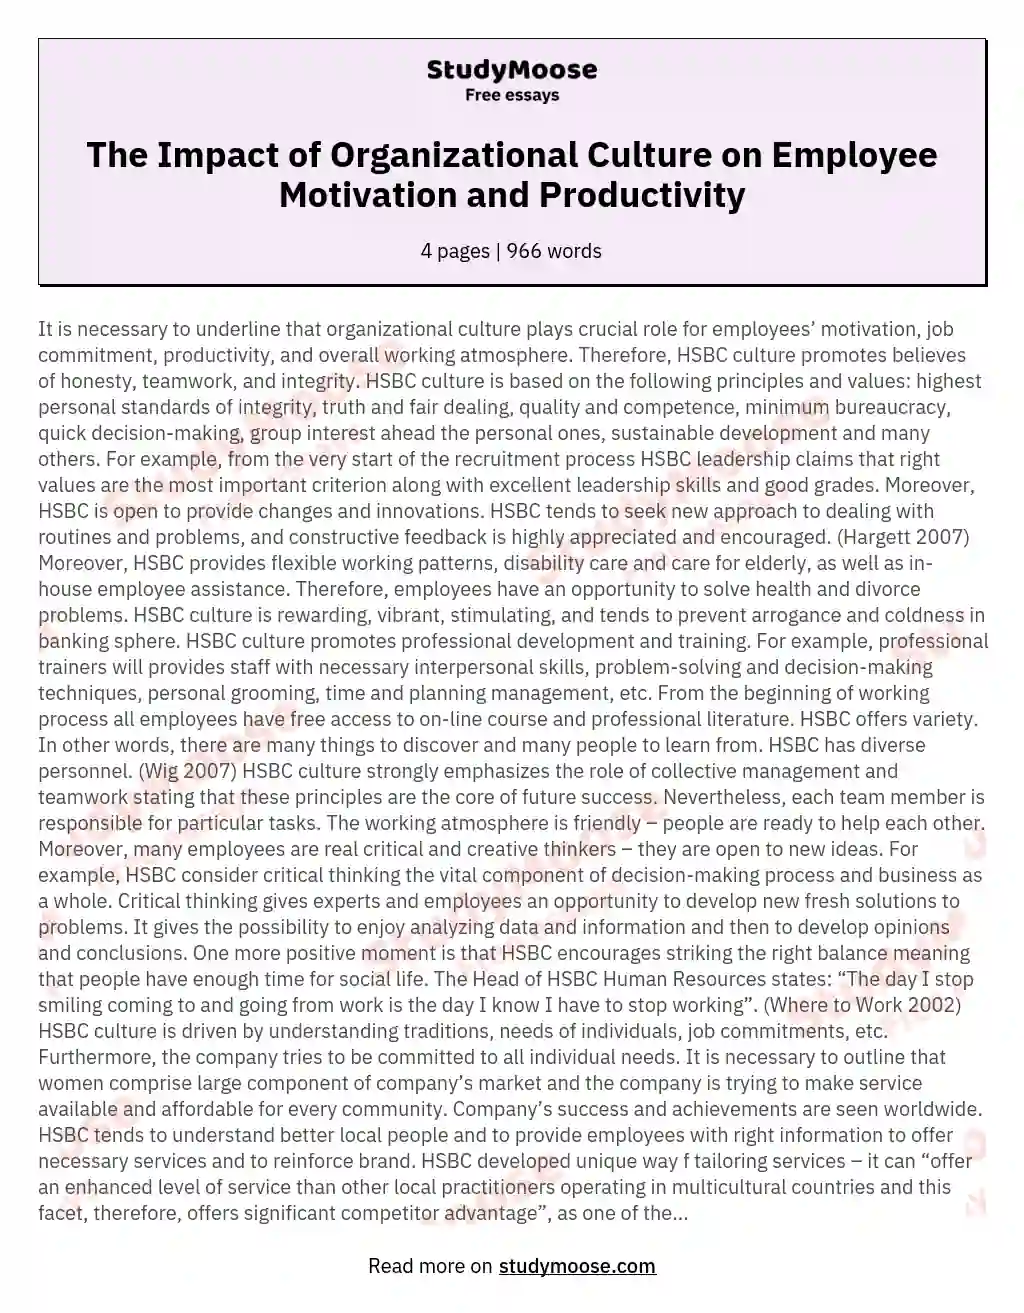 The Impact of Organizational Culture on Employee Motivation and Productivity essay